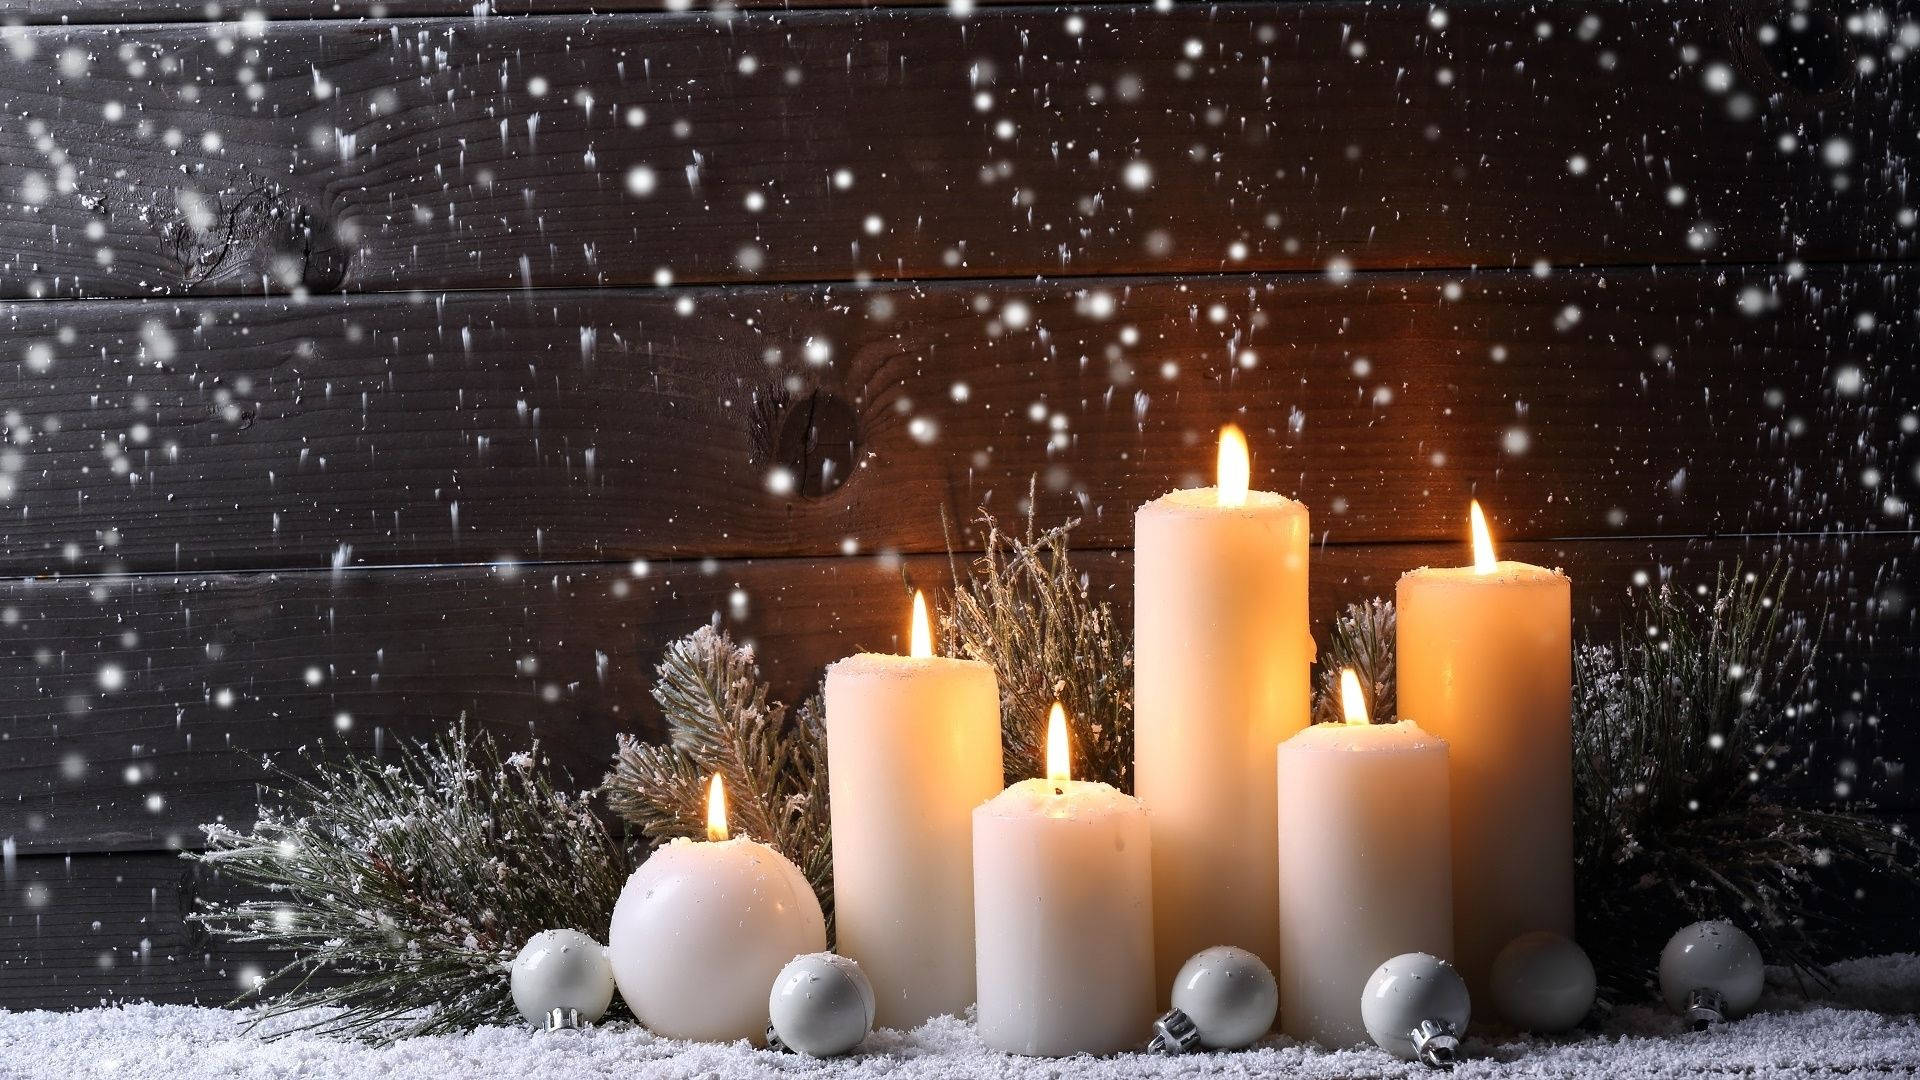 Candles In A Snowy Place Wallpaper